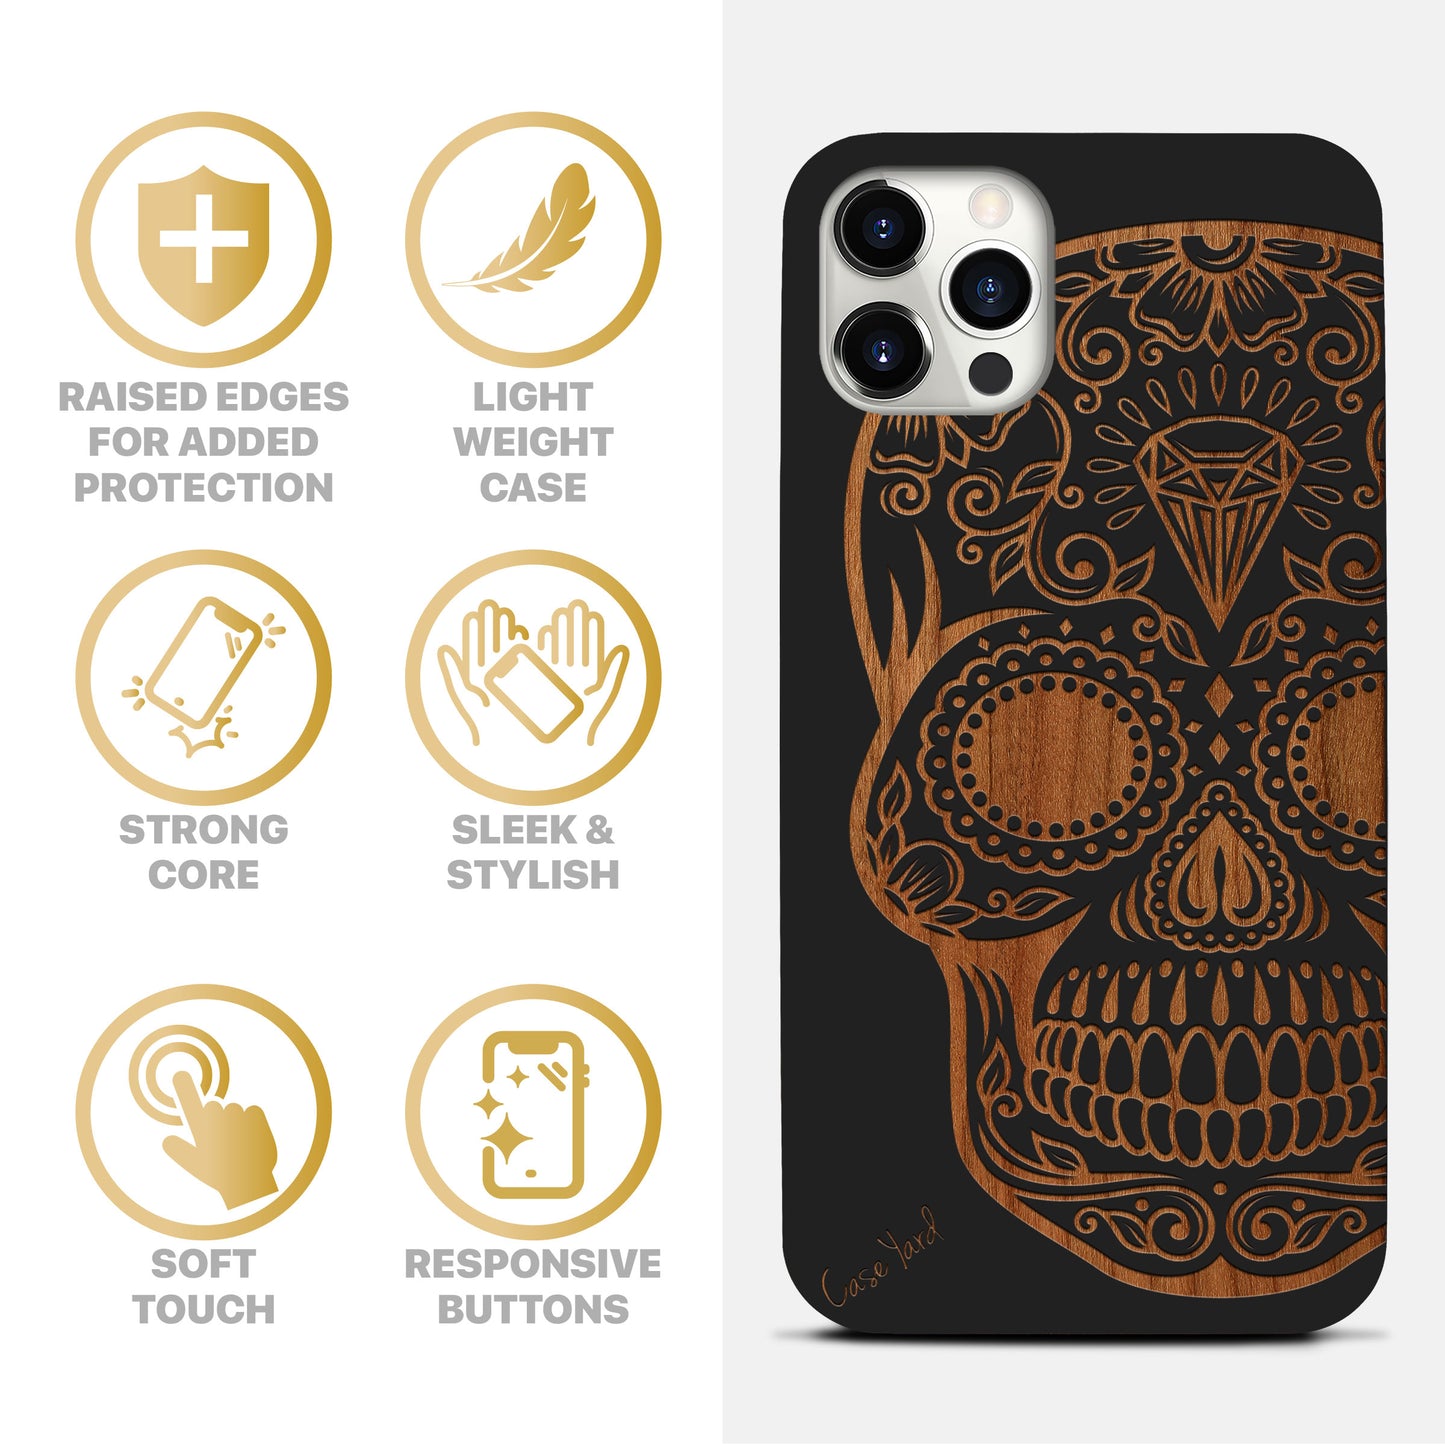 Wooden Cell Phone Case Cover, Laser Engraved case for iPhone & Samsung phone Diamond Skull Design